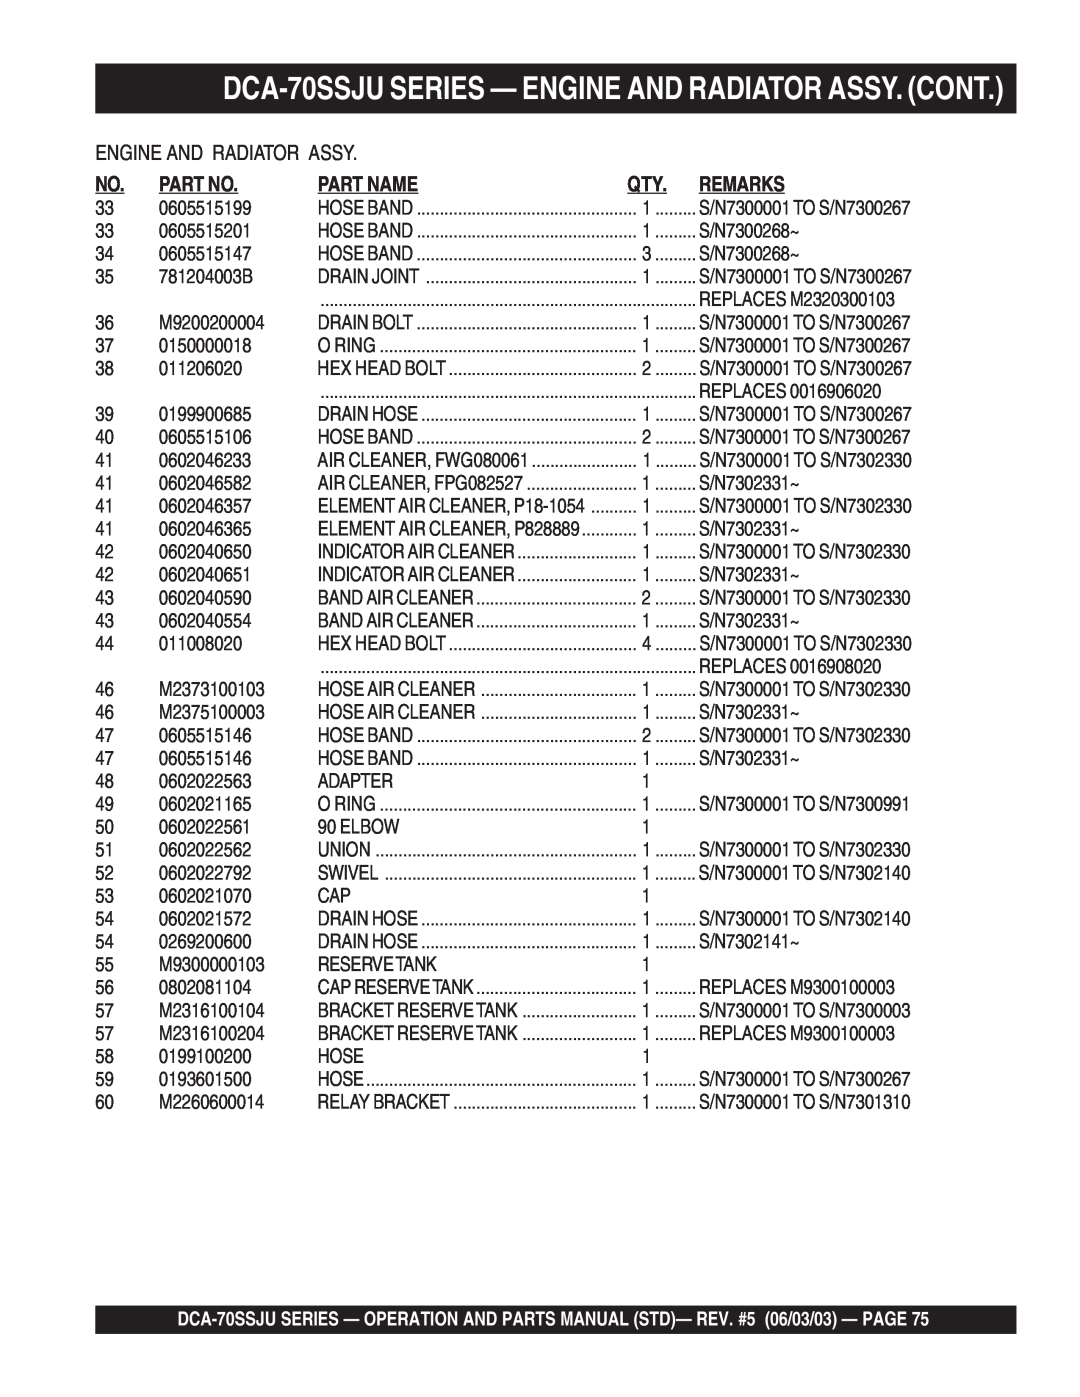 Multiquip operation manual DCA-70SSJUSERIES — ENGINE AND RADIATOR ASSY. CONT, Part No, Part Name, Remarks 